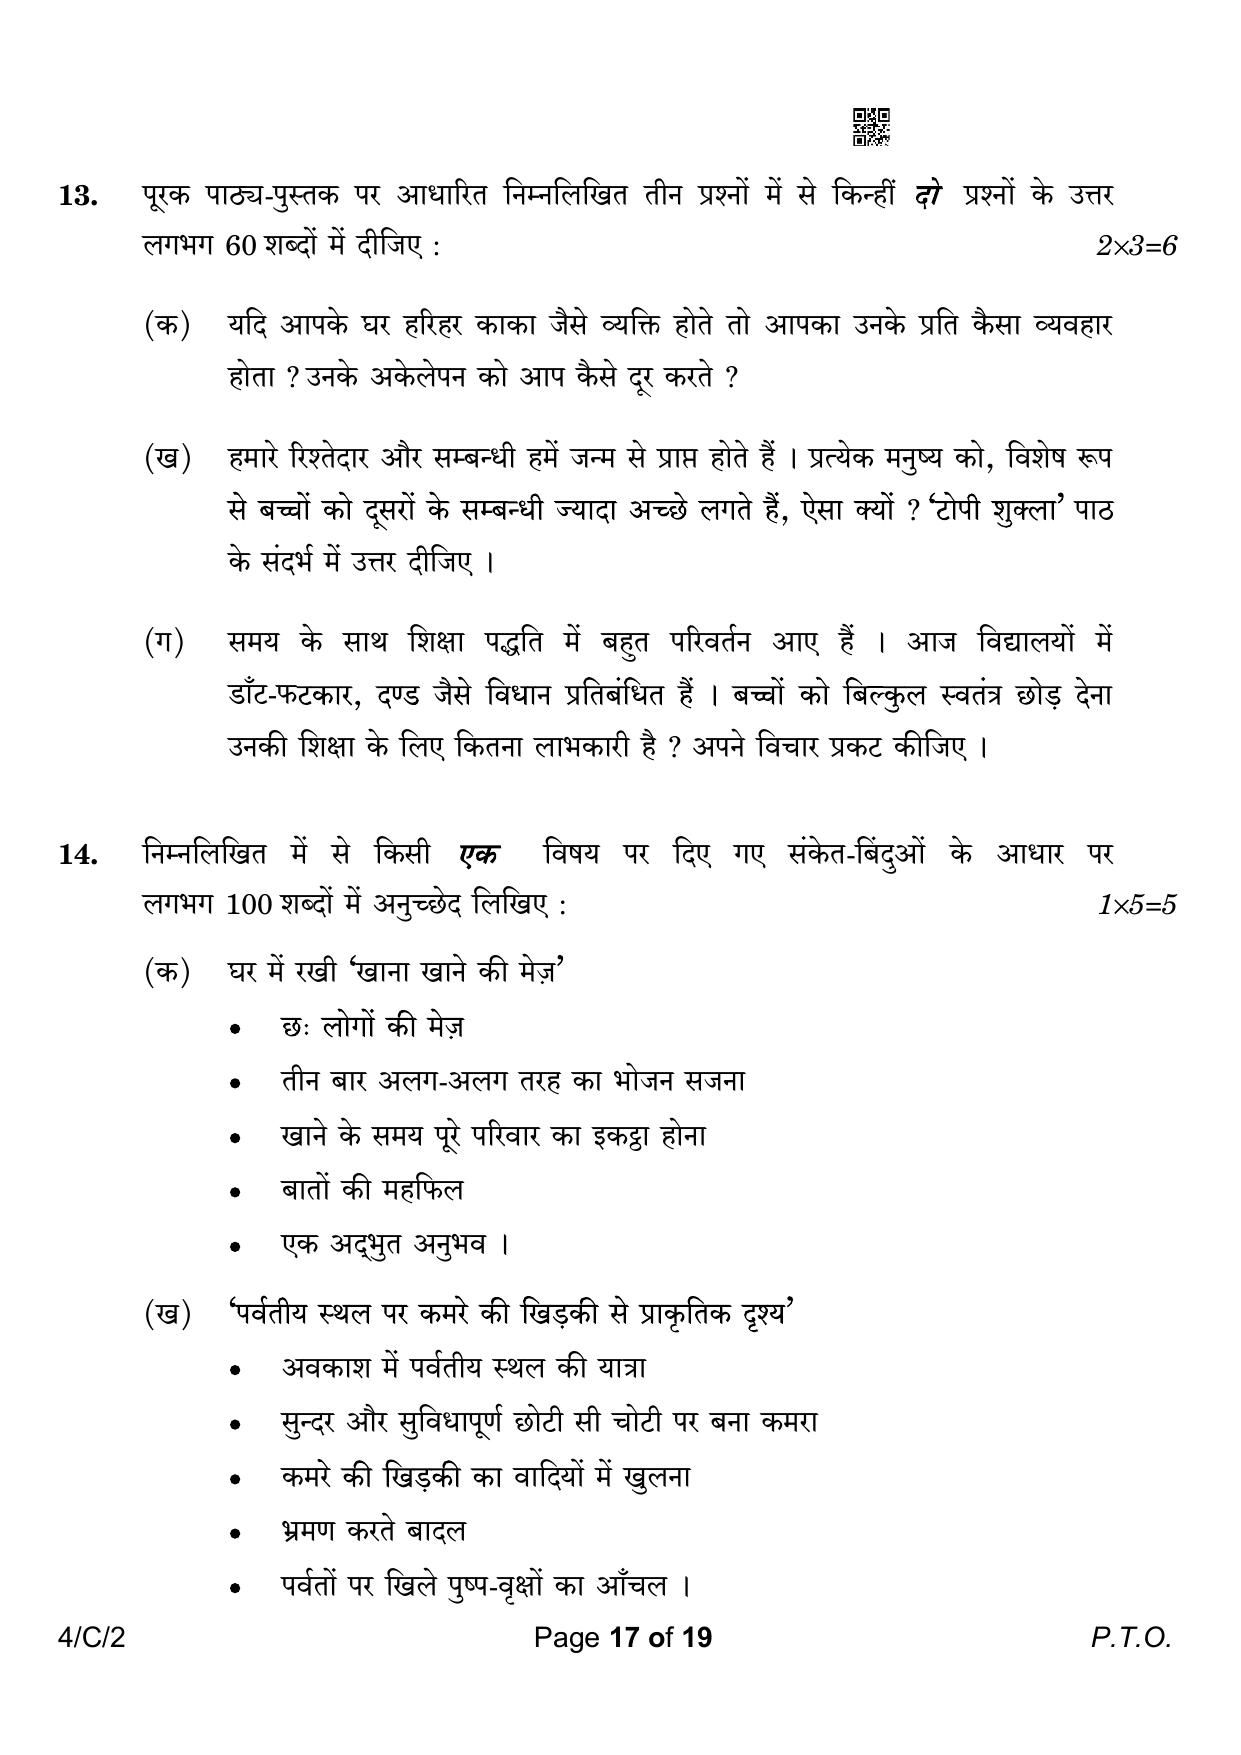 CBSE Class 10 4-2 Hindi B 2023 (Compartment) Question Paper - Page 17